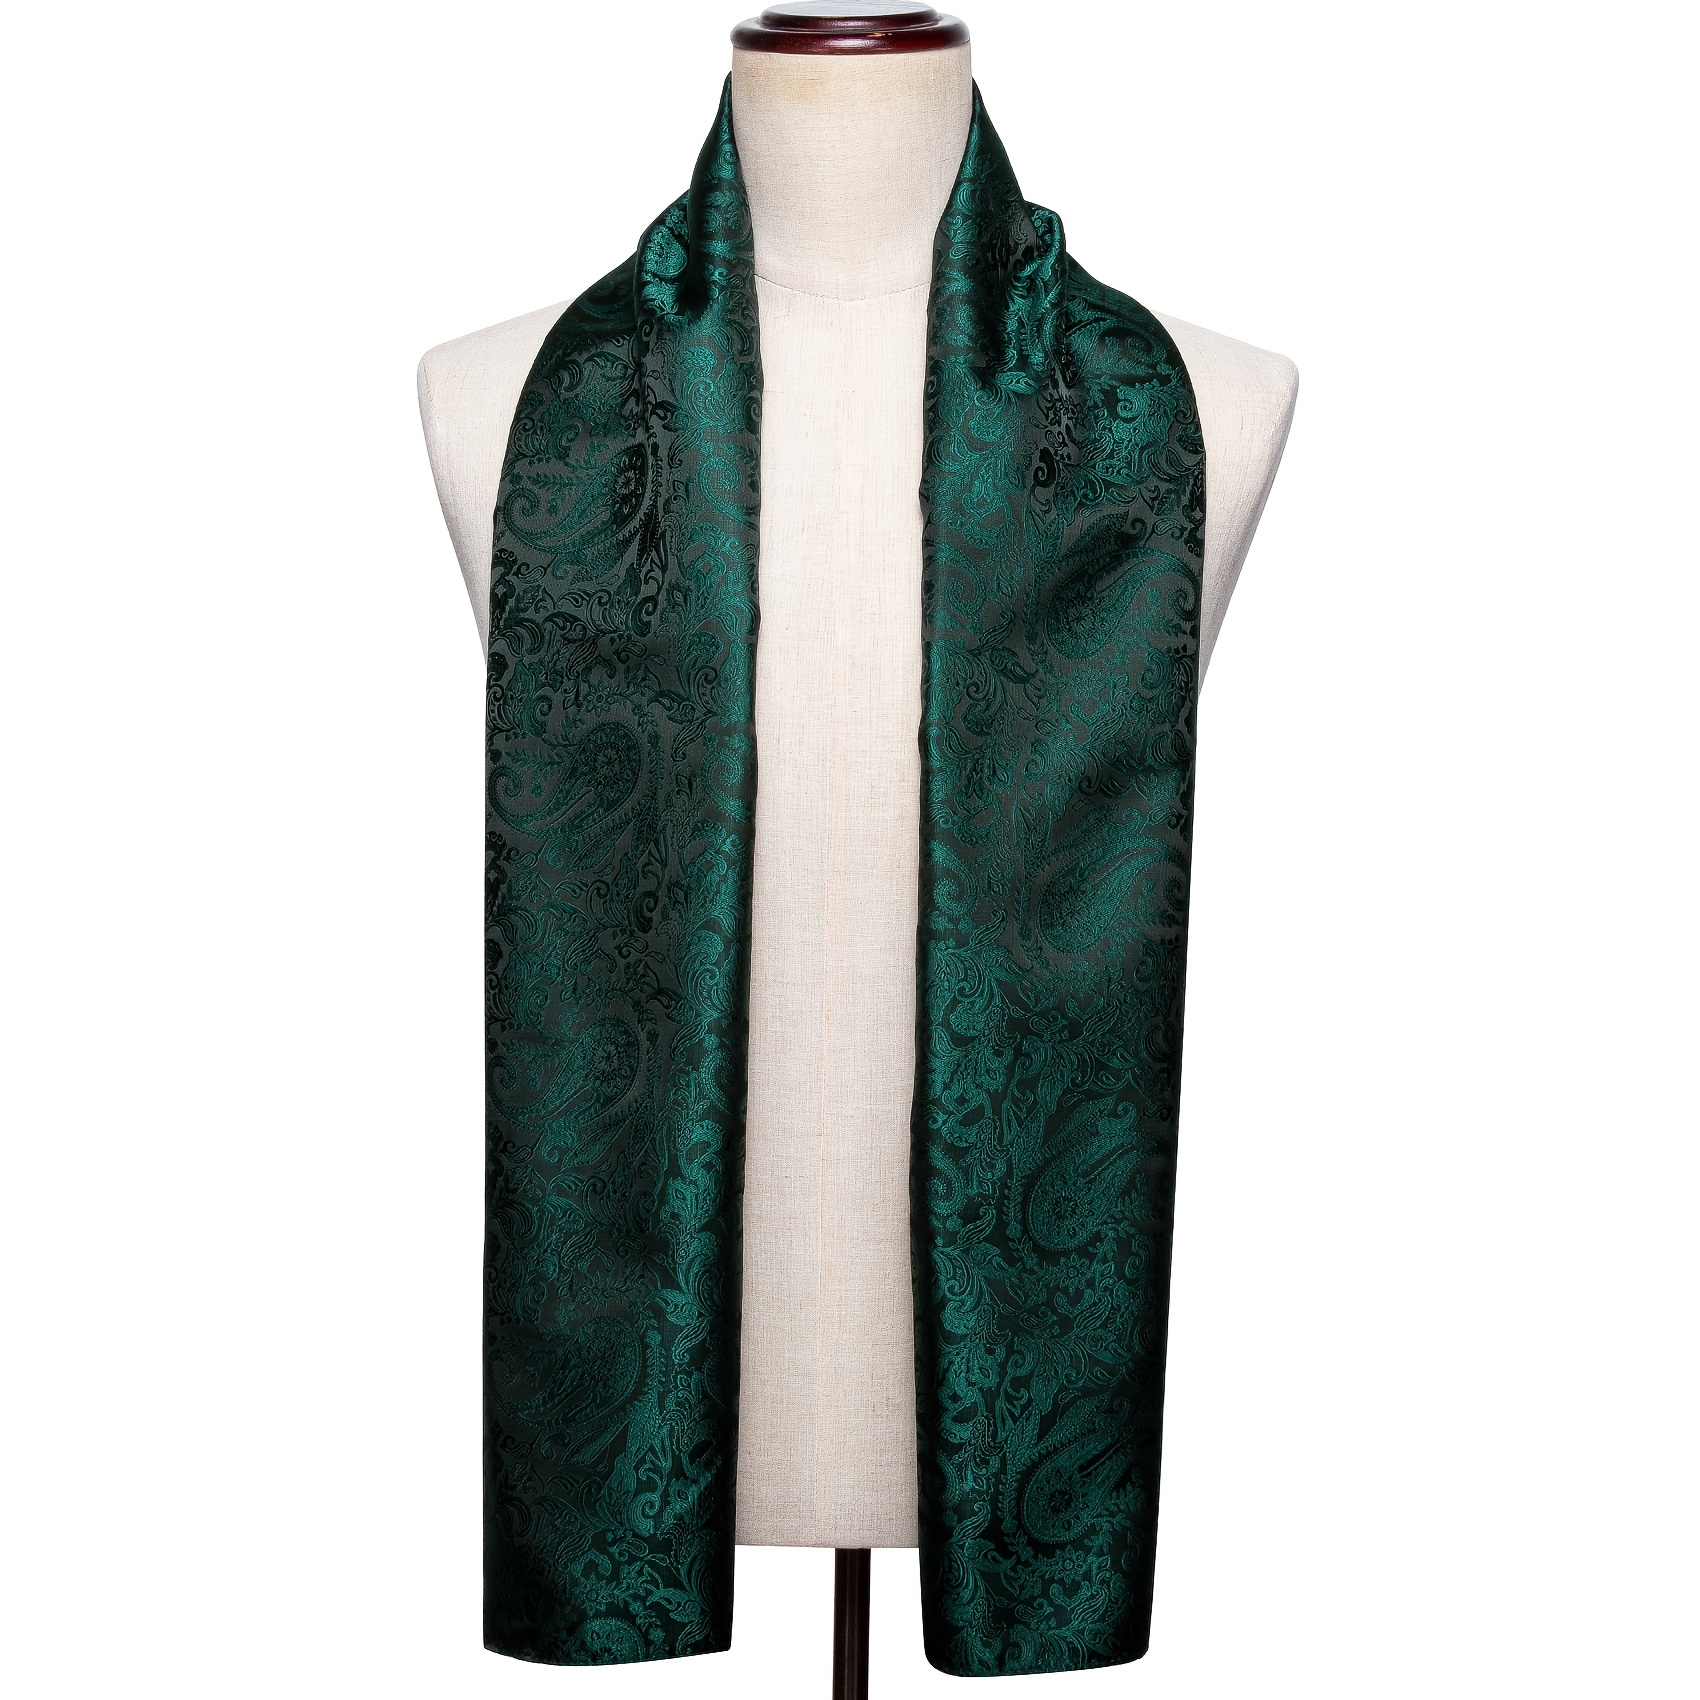 1pc Faux Cashmere Jacquard Woven Women's Scarf Shawl For Daily Wear In  Autumn And Winter